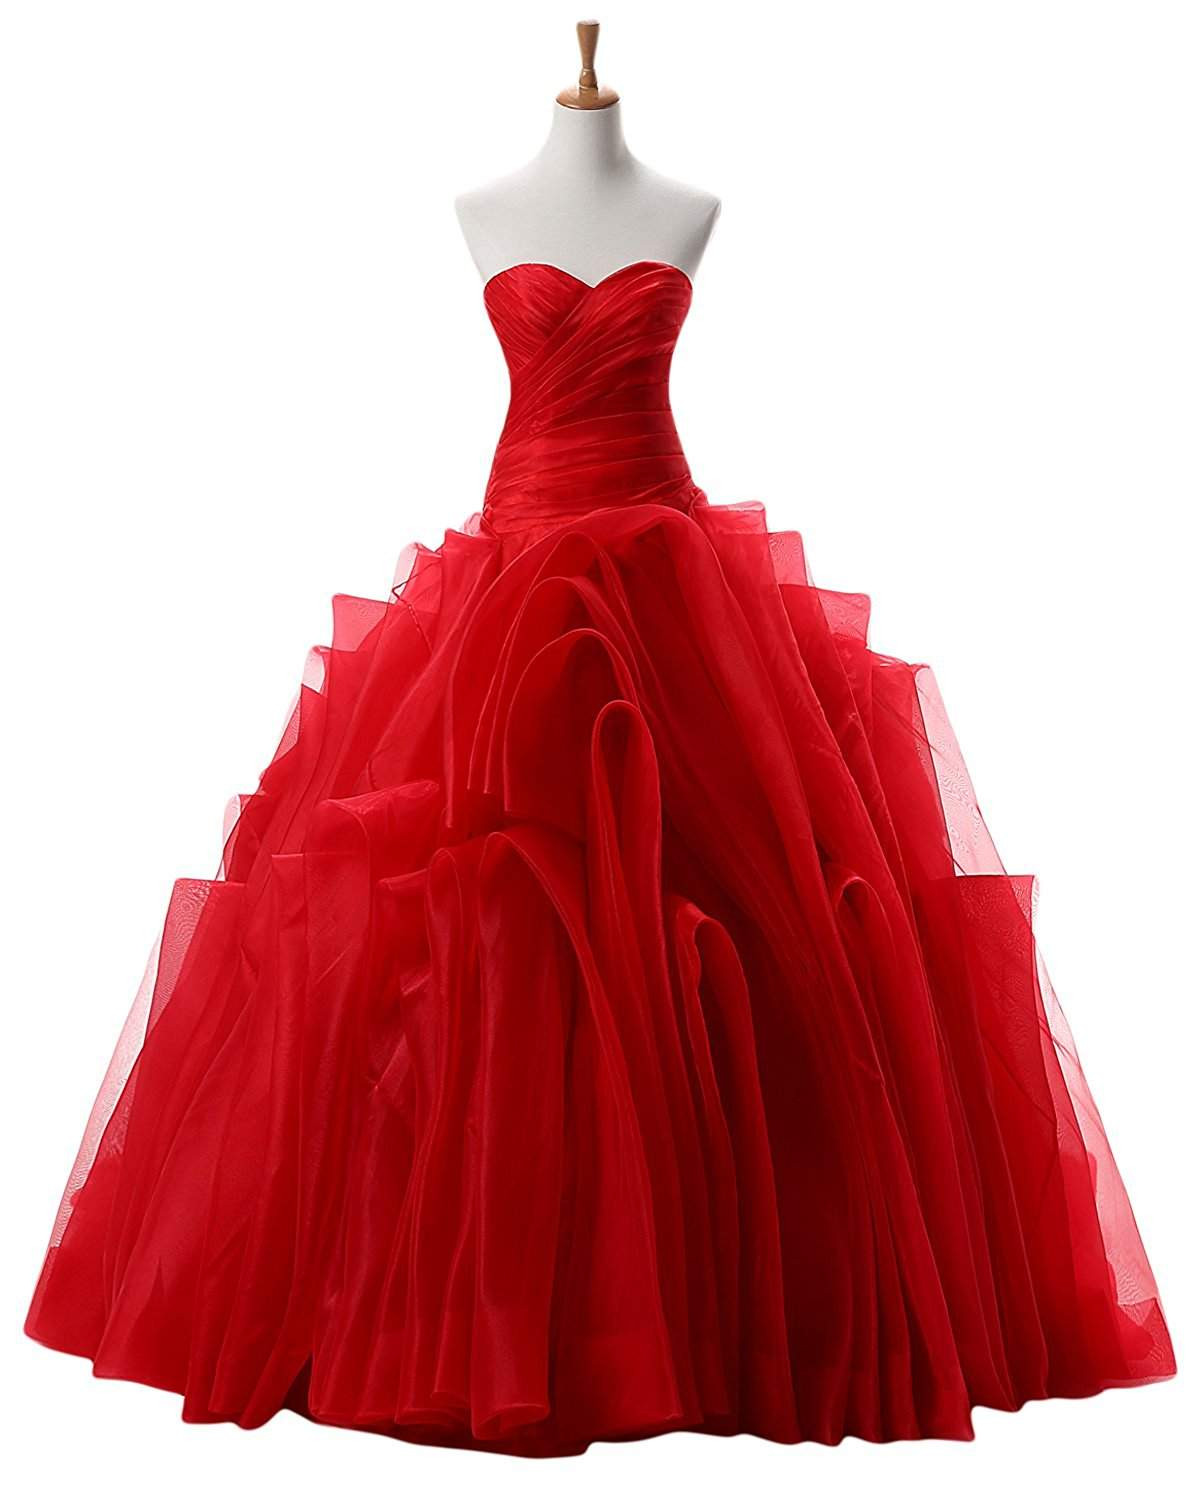 Red Dresses For Wedding
 Top 25 Best Red Wedding Dresses